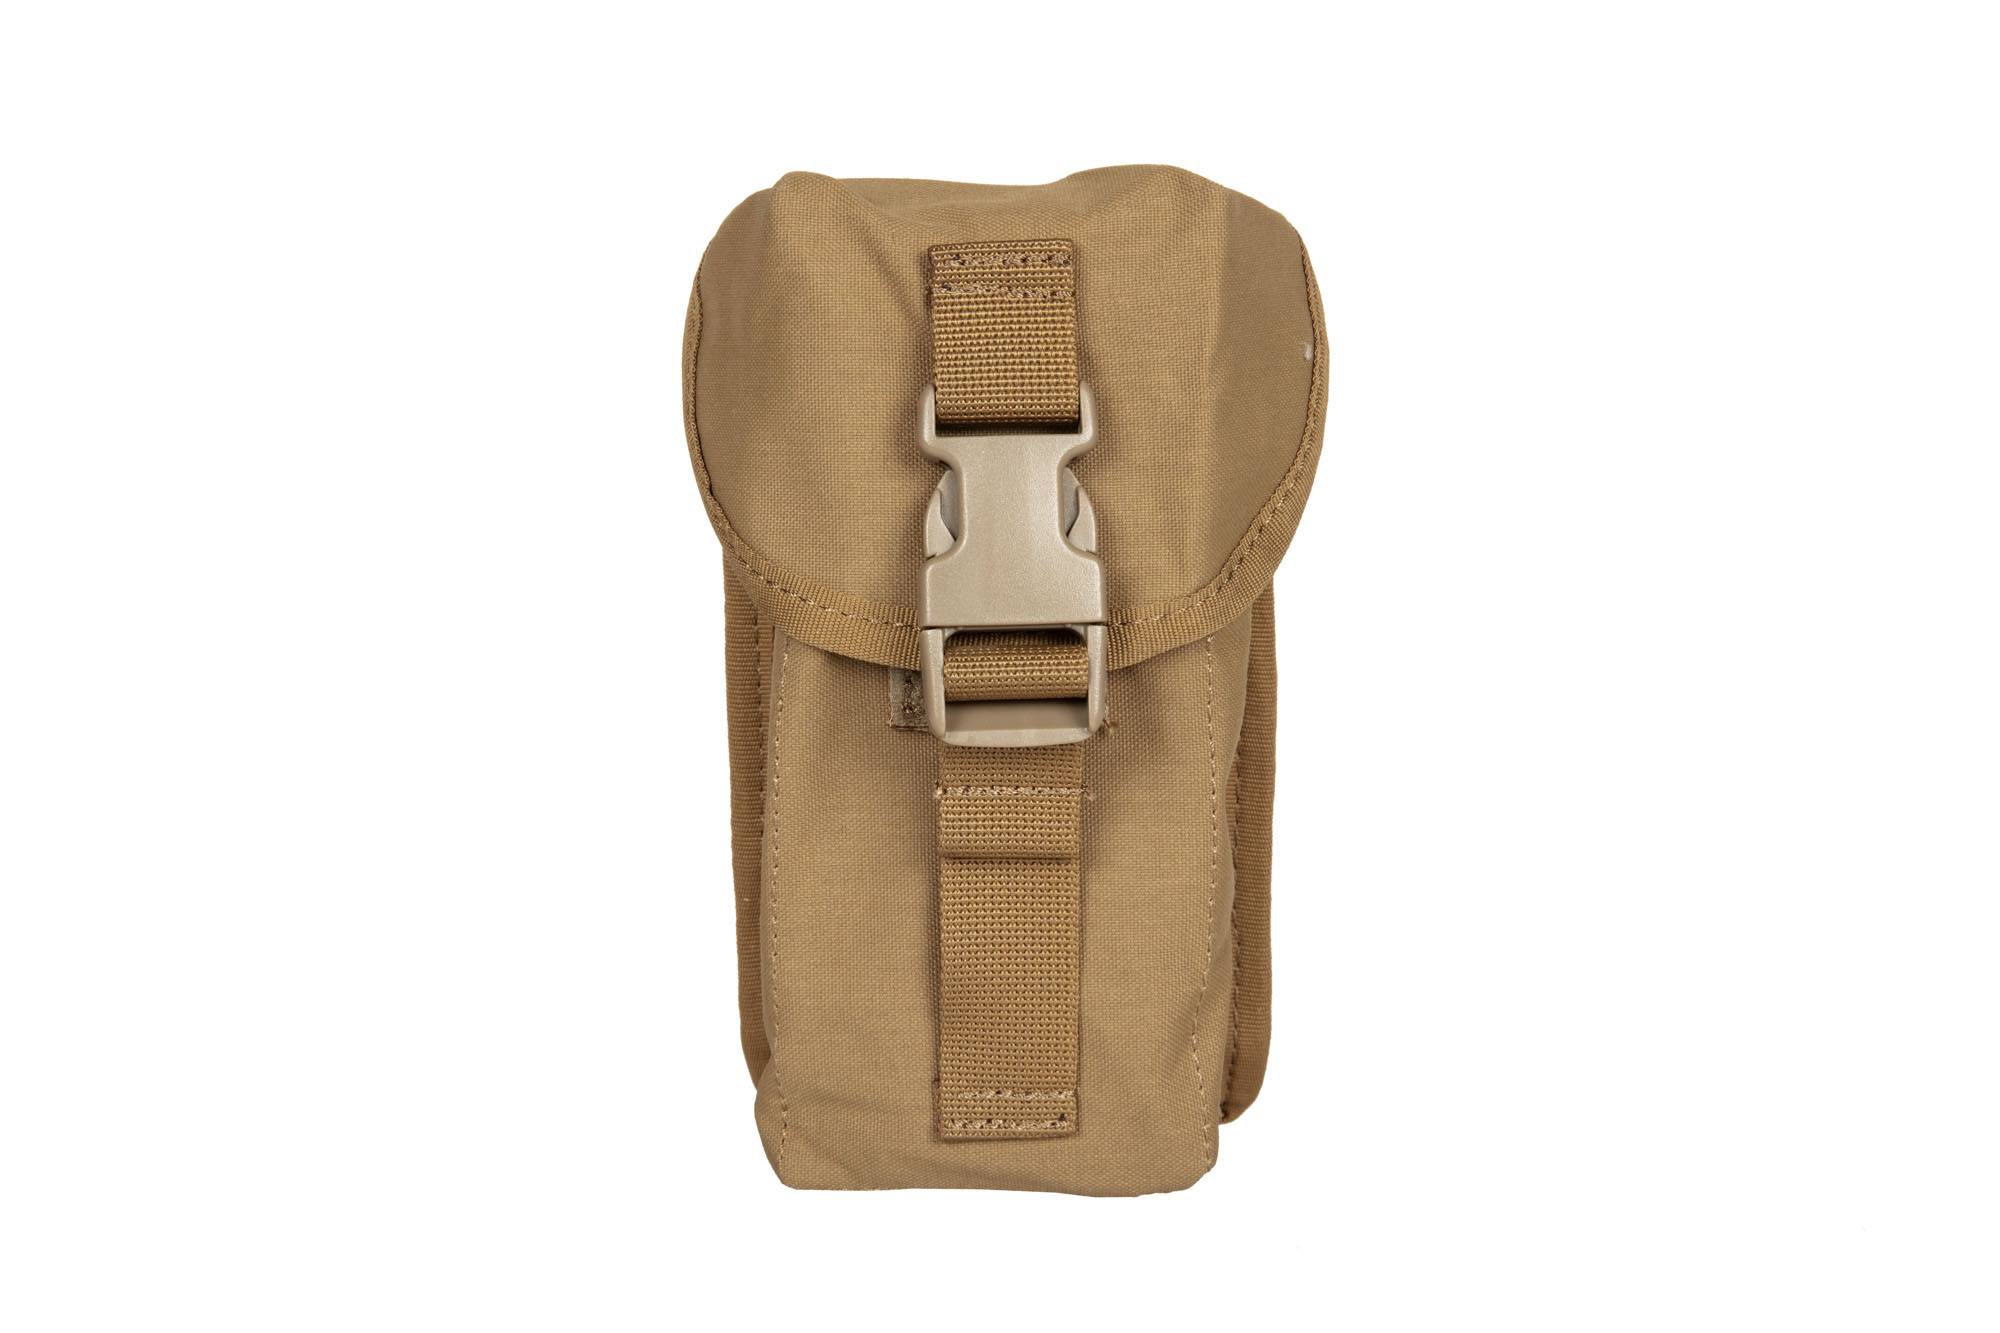 Groot pouch All-Purpose Pidae - Coyote Brown